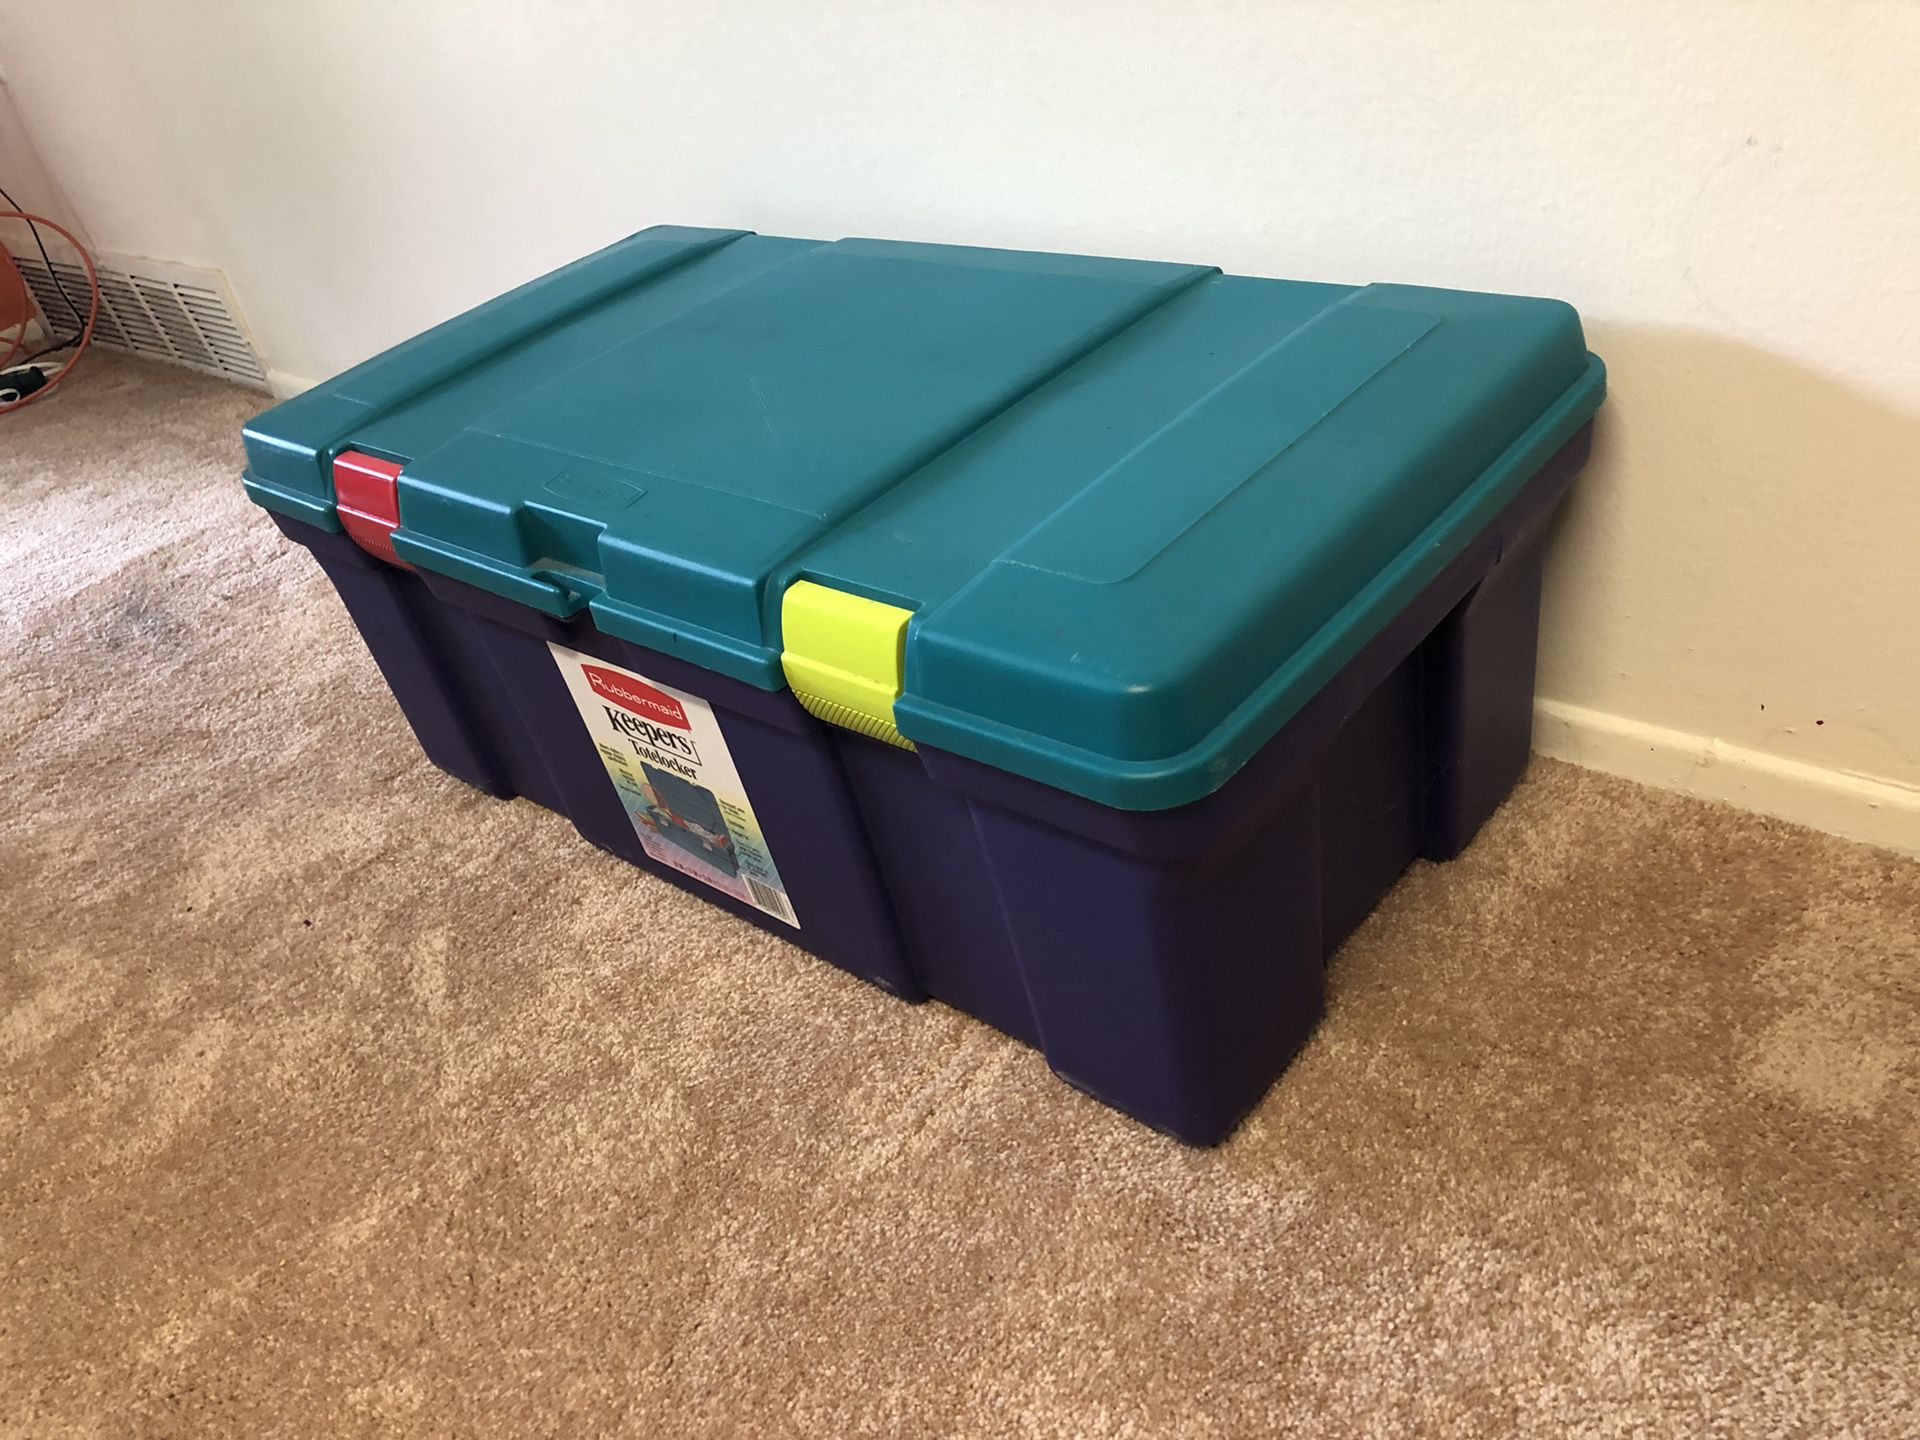 Rubbermaid Flex And Seal 38 Piece for Sale in Norfolk, VA - OfferUp